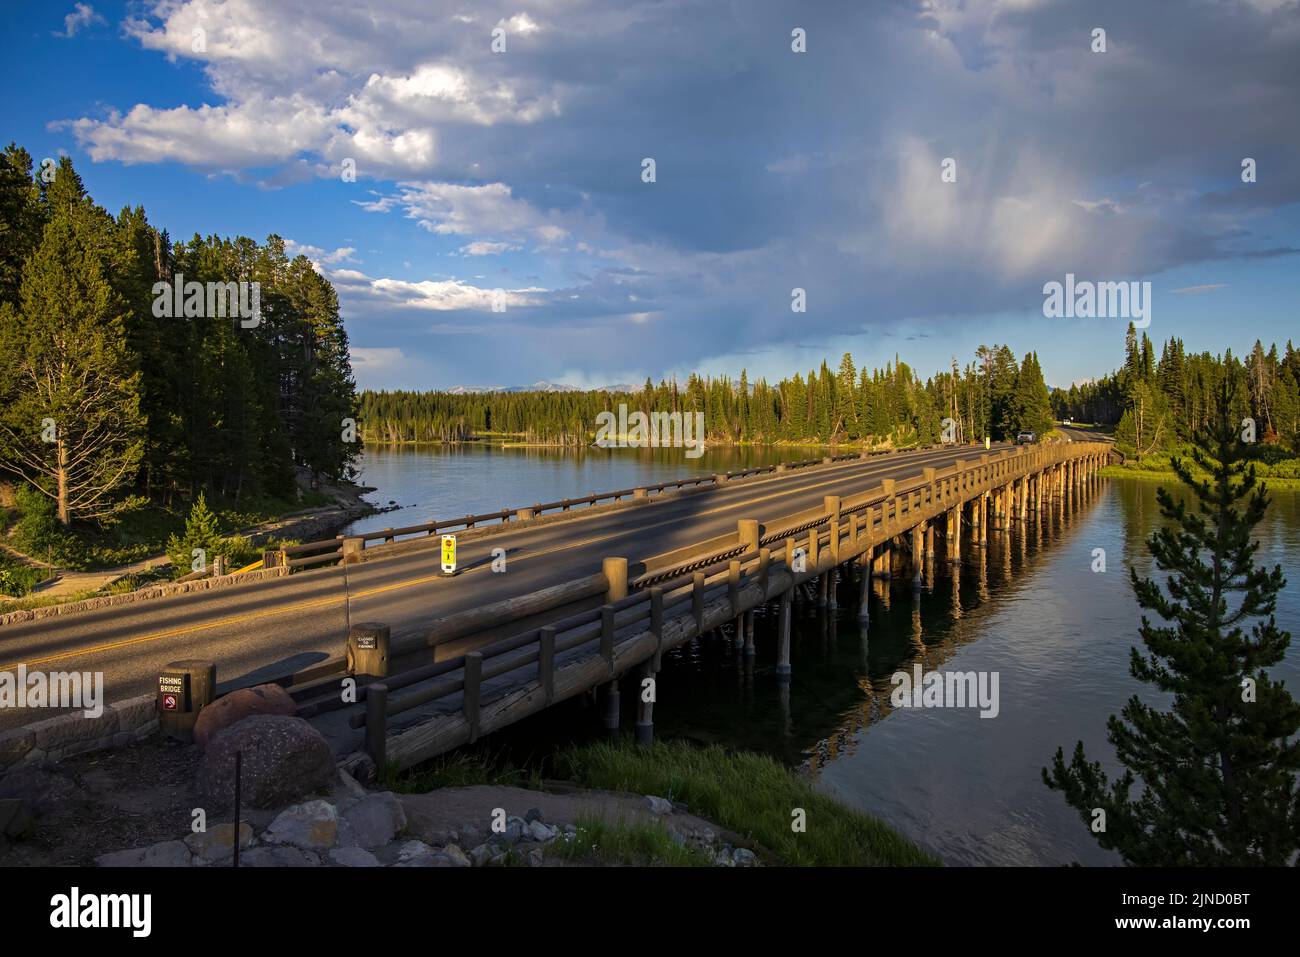 This is a late afternoon view of historic Fishing Bridge, spanning the Yellowstone River in Yellowstone National Park, Teton County, Wyoming. Stock Photo